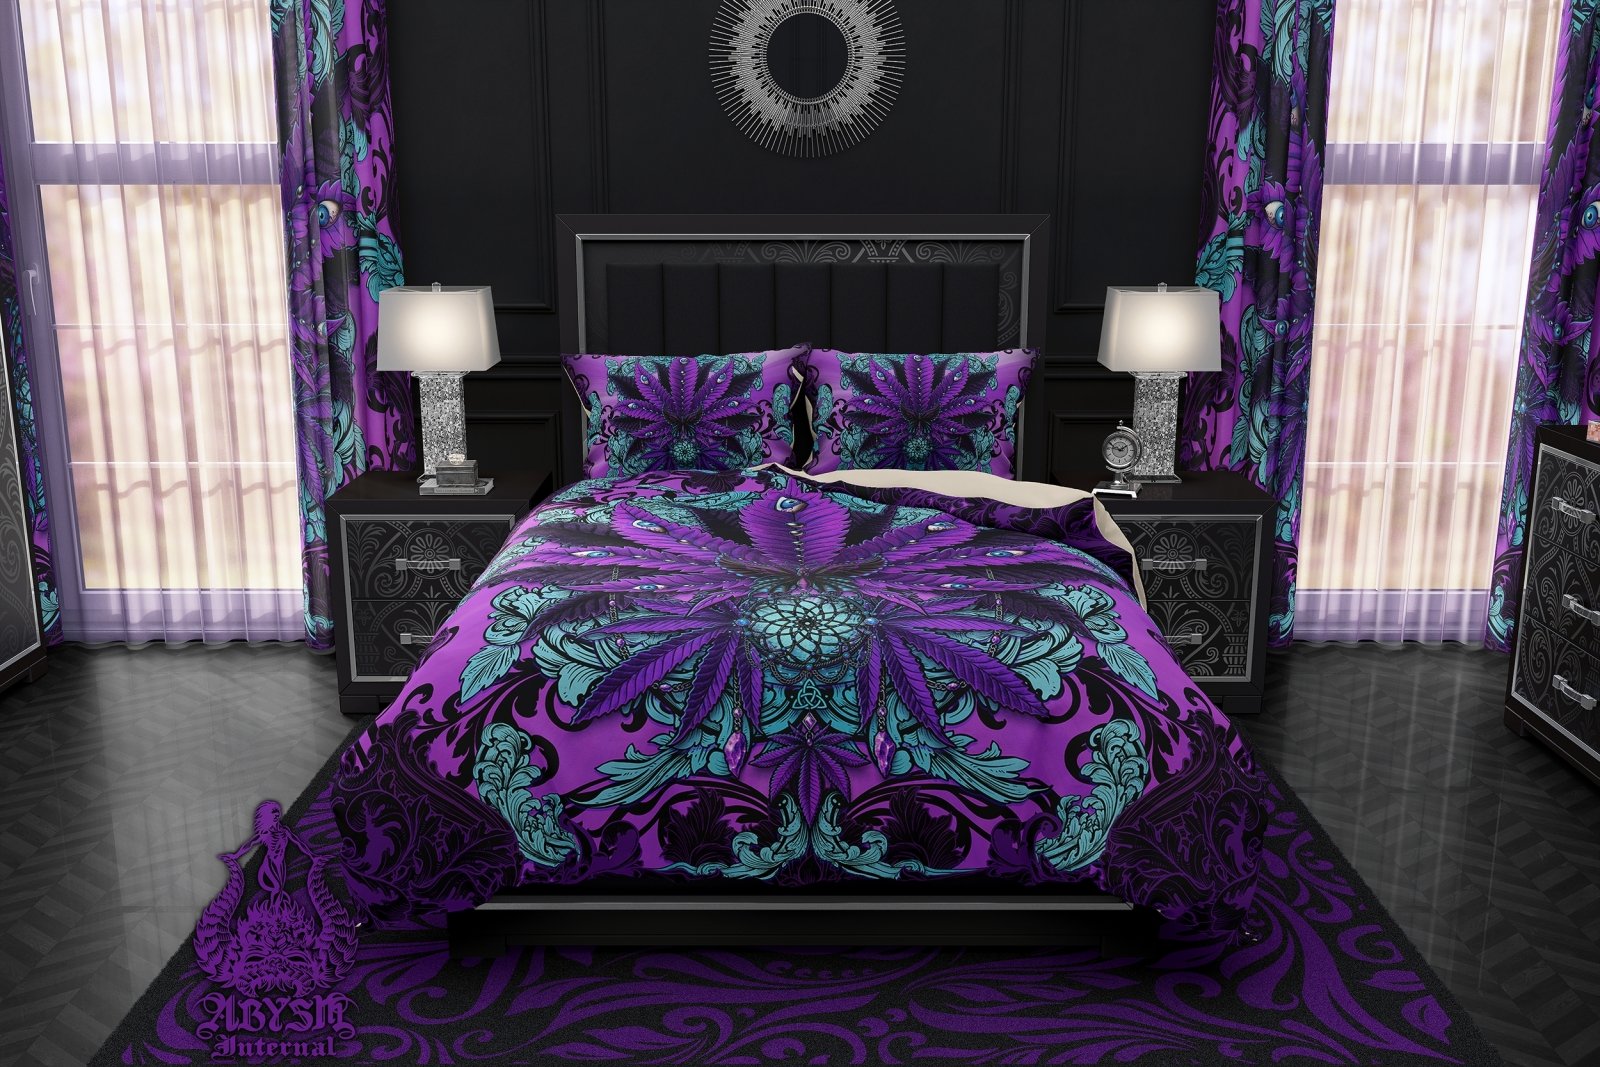 Gothic Weed Bedding Set, Comforter and Duvet, Cannabis Bed Cover, Marijuana Bedroom Decor, King, Queen and Twin Size, 420 Room Art - Pastel Goth - Abysm Internal